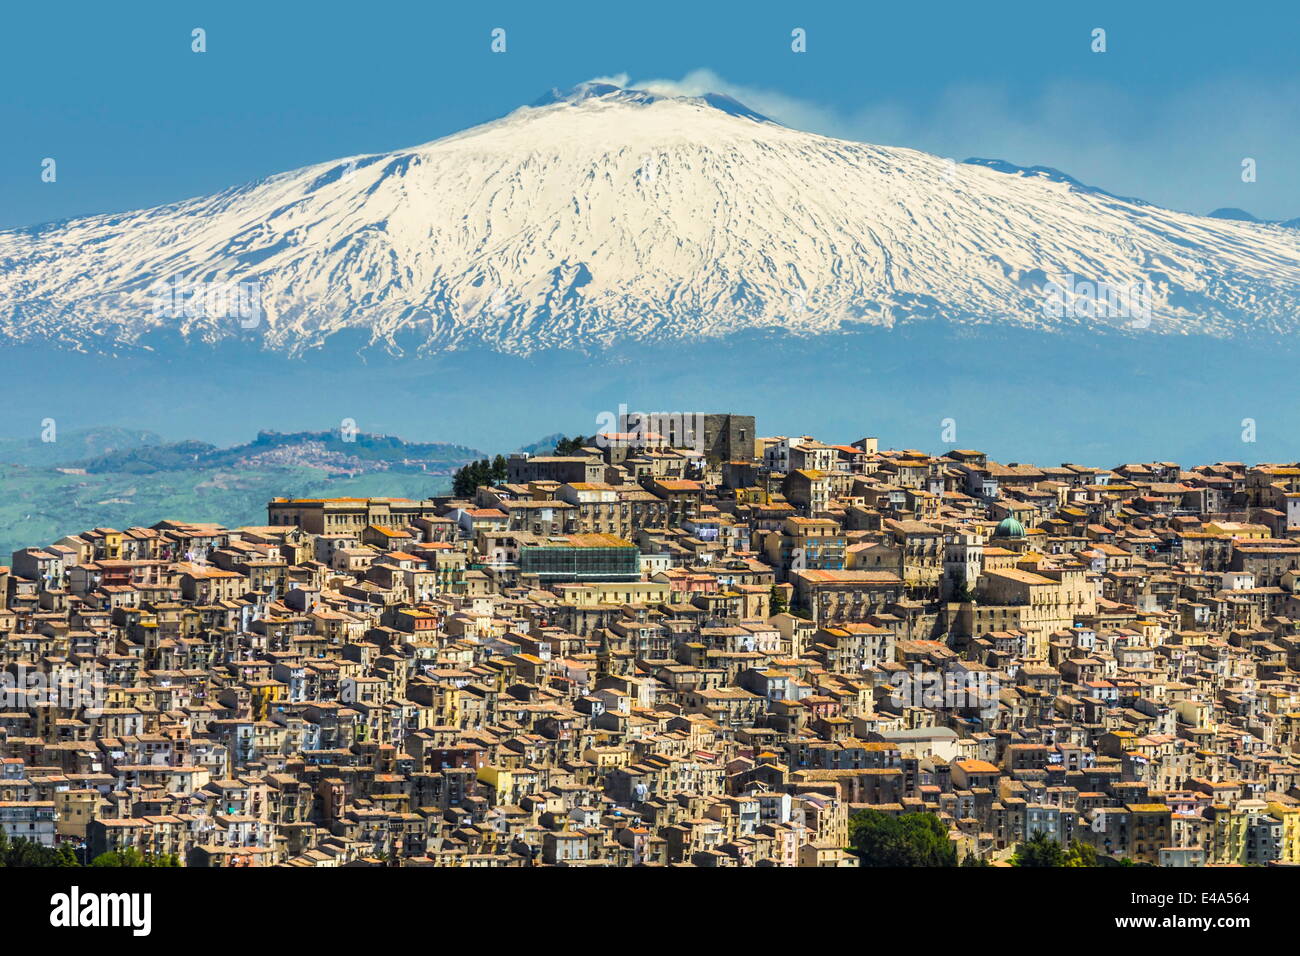 Hill town with backdrop of snowy volcano Mount Etna, Gangi, Palermo Province, Sicily, Italy, Mediterranean, Europe Stock Photo